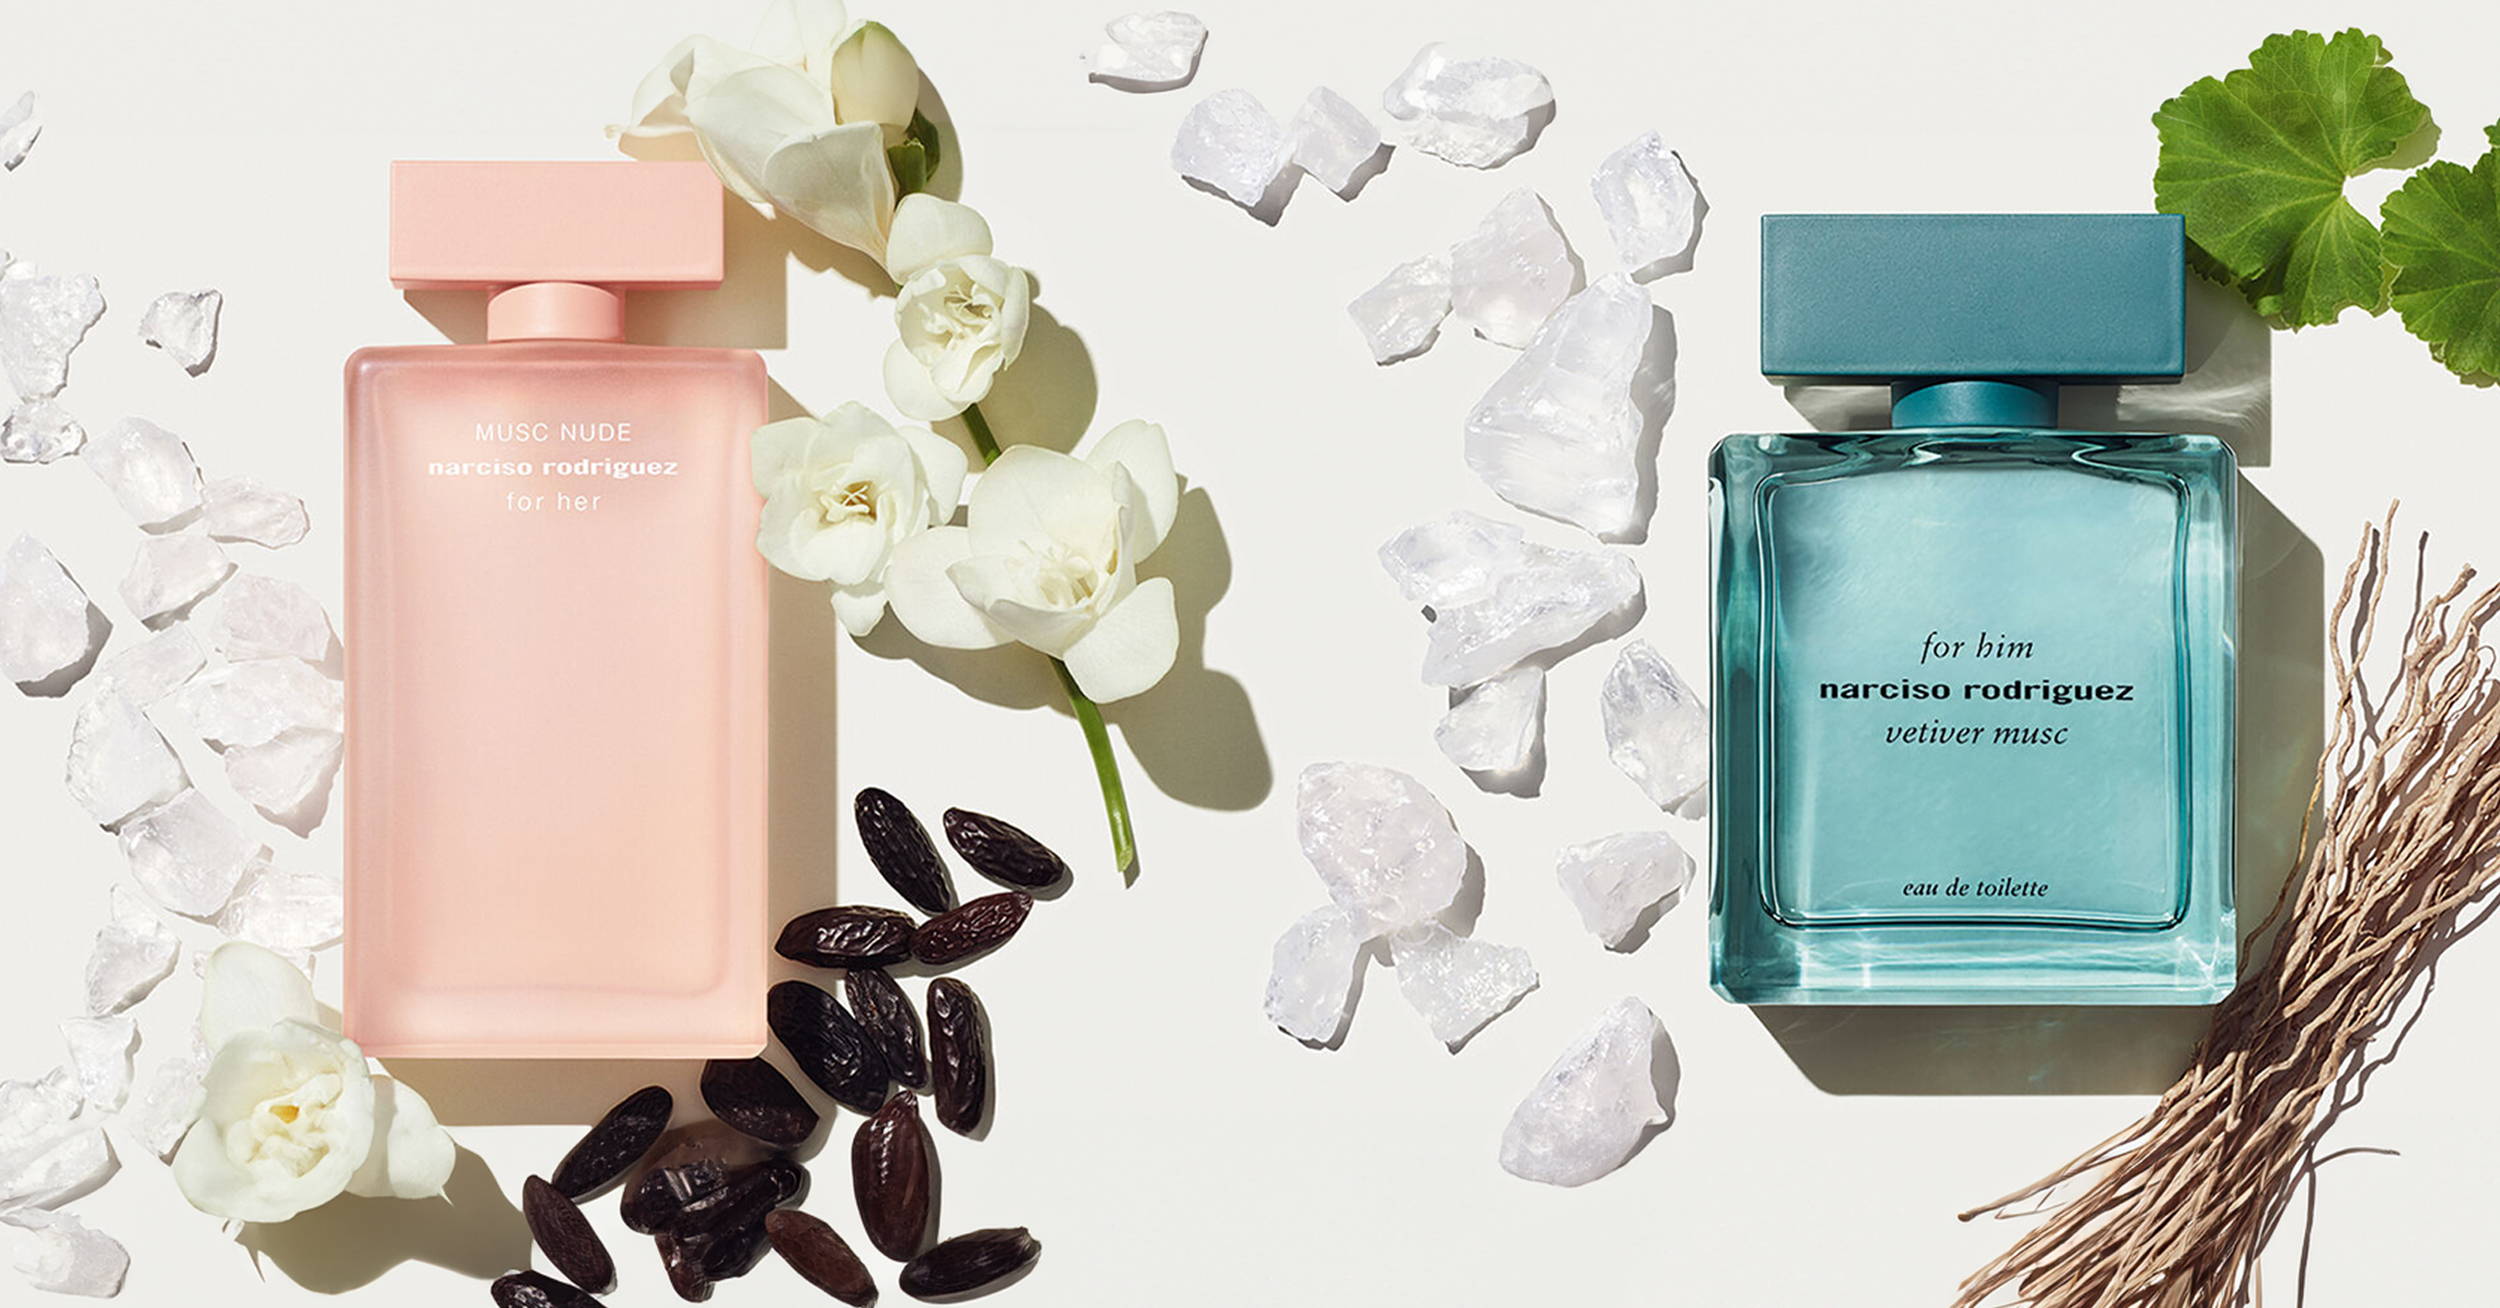 Summer skin, second skin: narciso rodriguez's newest fragrances embrace ...